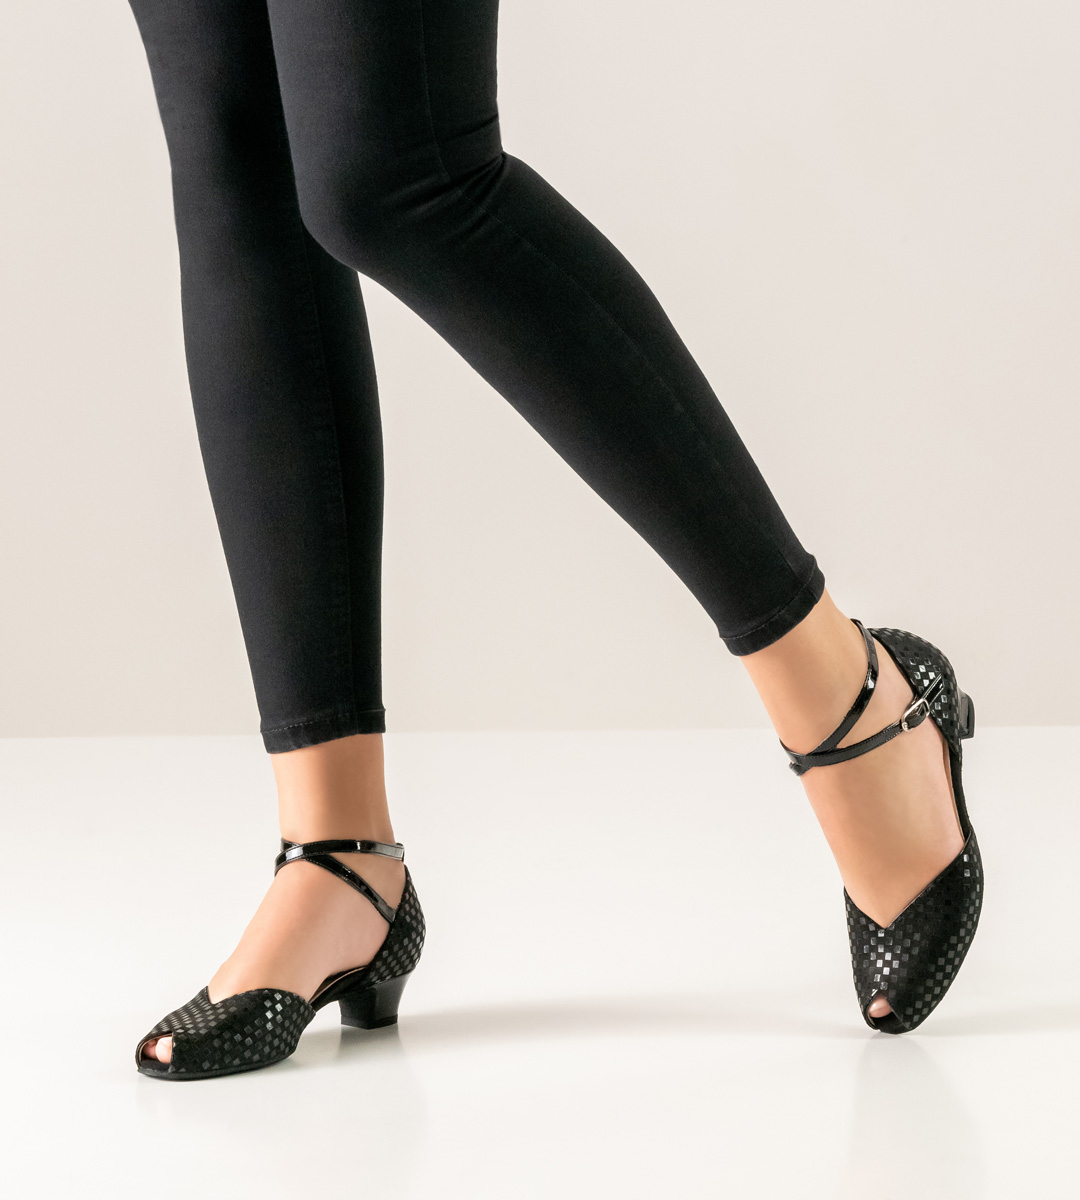 open Werner Kern ladies dance shoe with 3.4 cm heel combined with black trousers